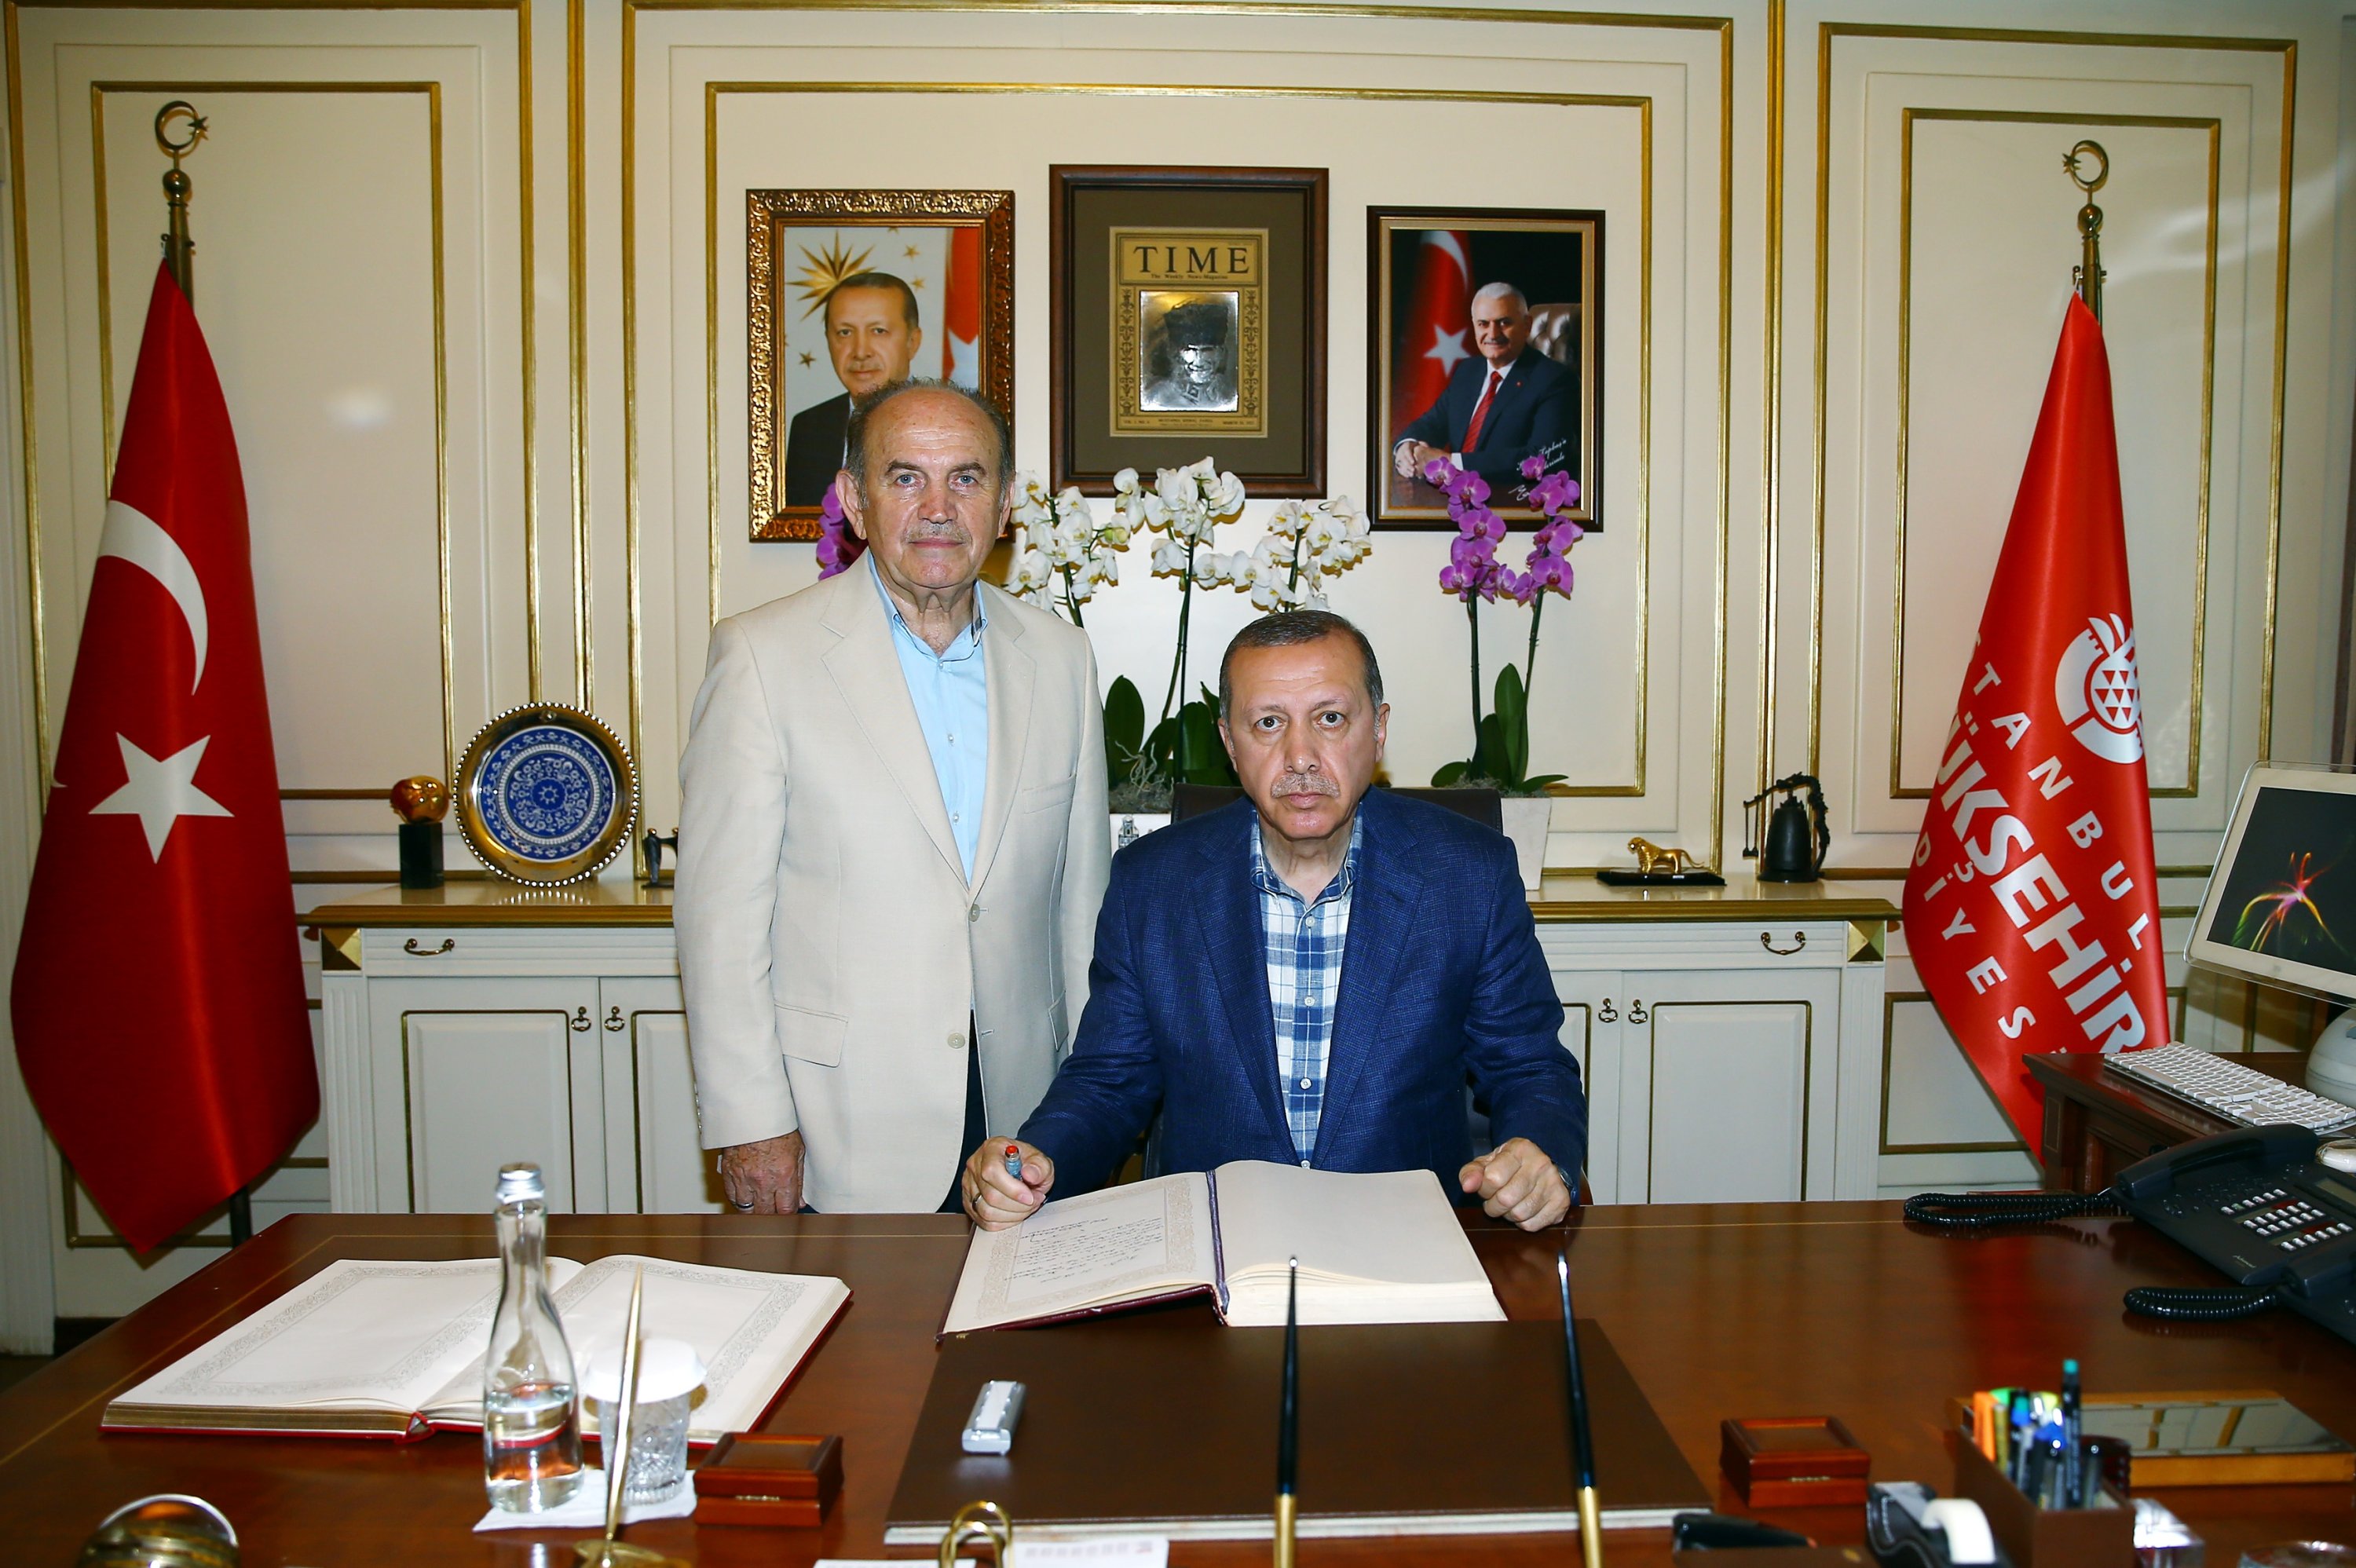 President Recep Tayyip Erdoğan (R) visits then Istanbul Mayor Kadir Topbaş at his office in metropolitan municipality headquarters. Erdoğan also served as the mayor of the megapolis between 1994 and 1998. (AA Photo)